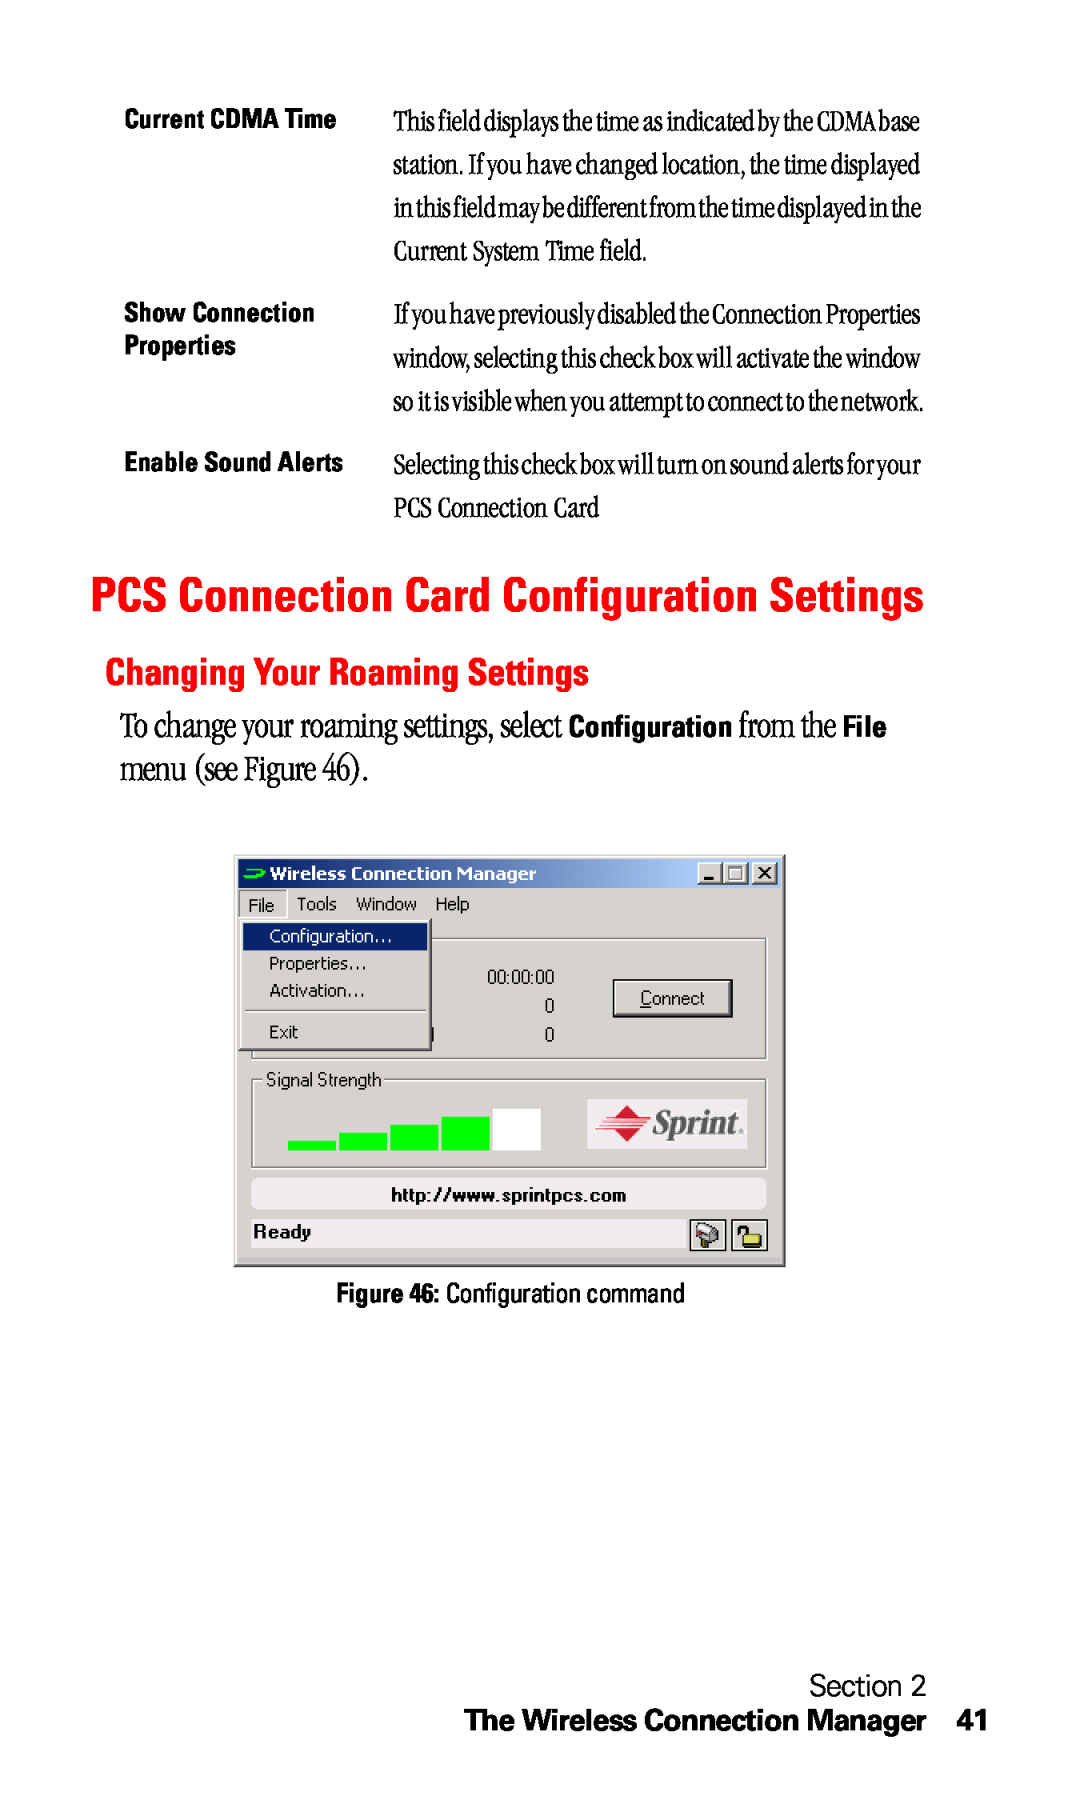 Sprint Nextel C201 PCS Connection Card Configuration Settings, Changing Your Roaming Settings, Section, Current CDMA Time 